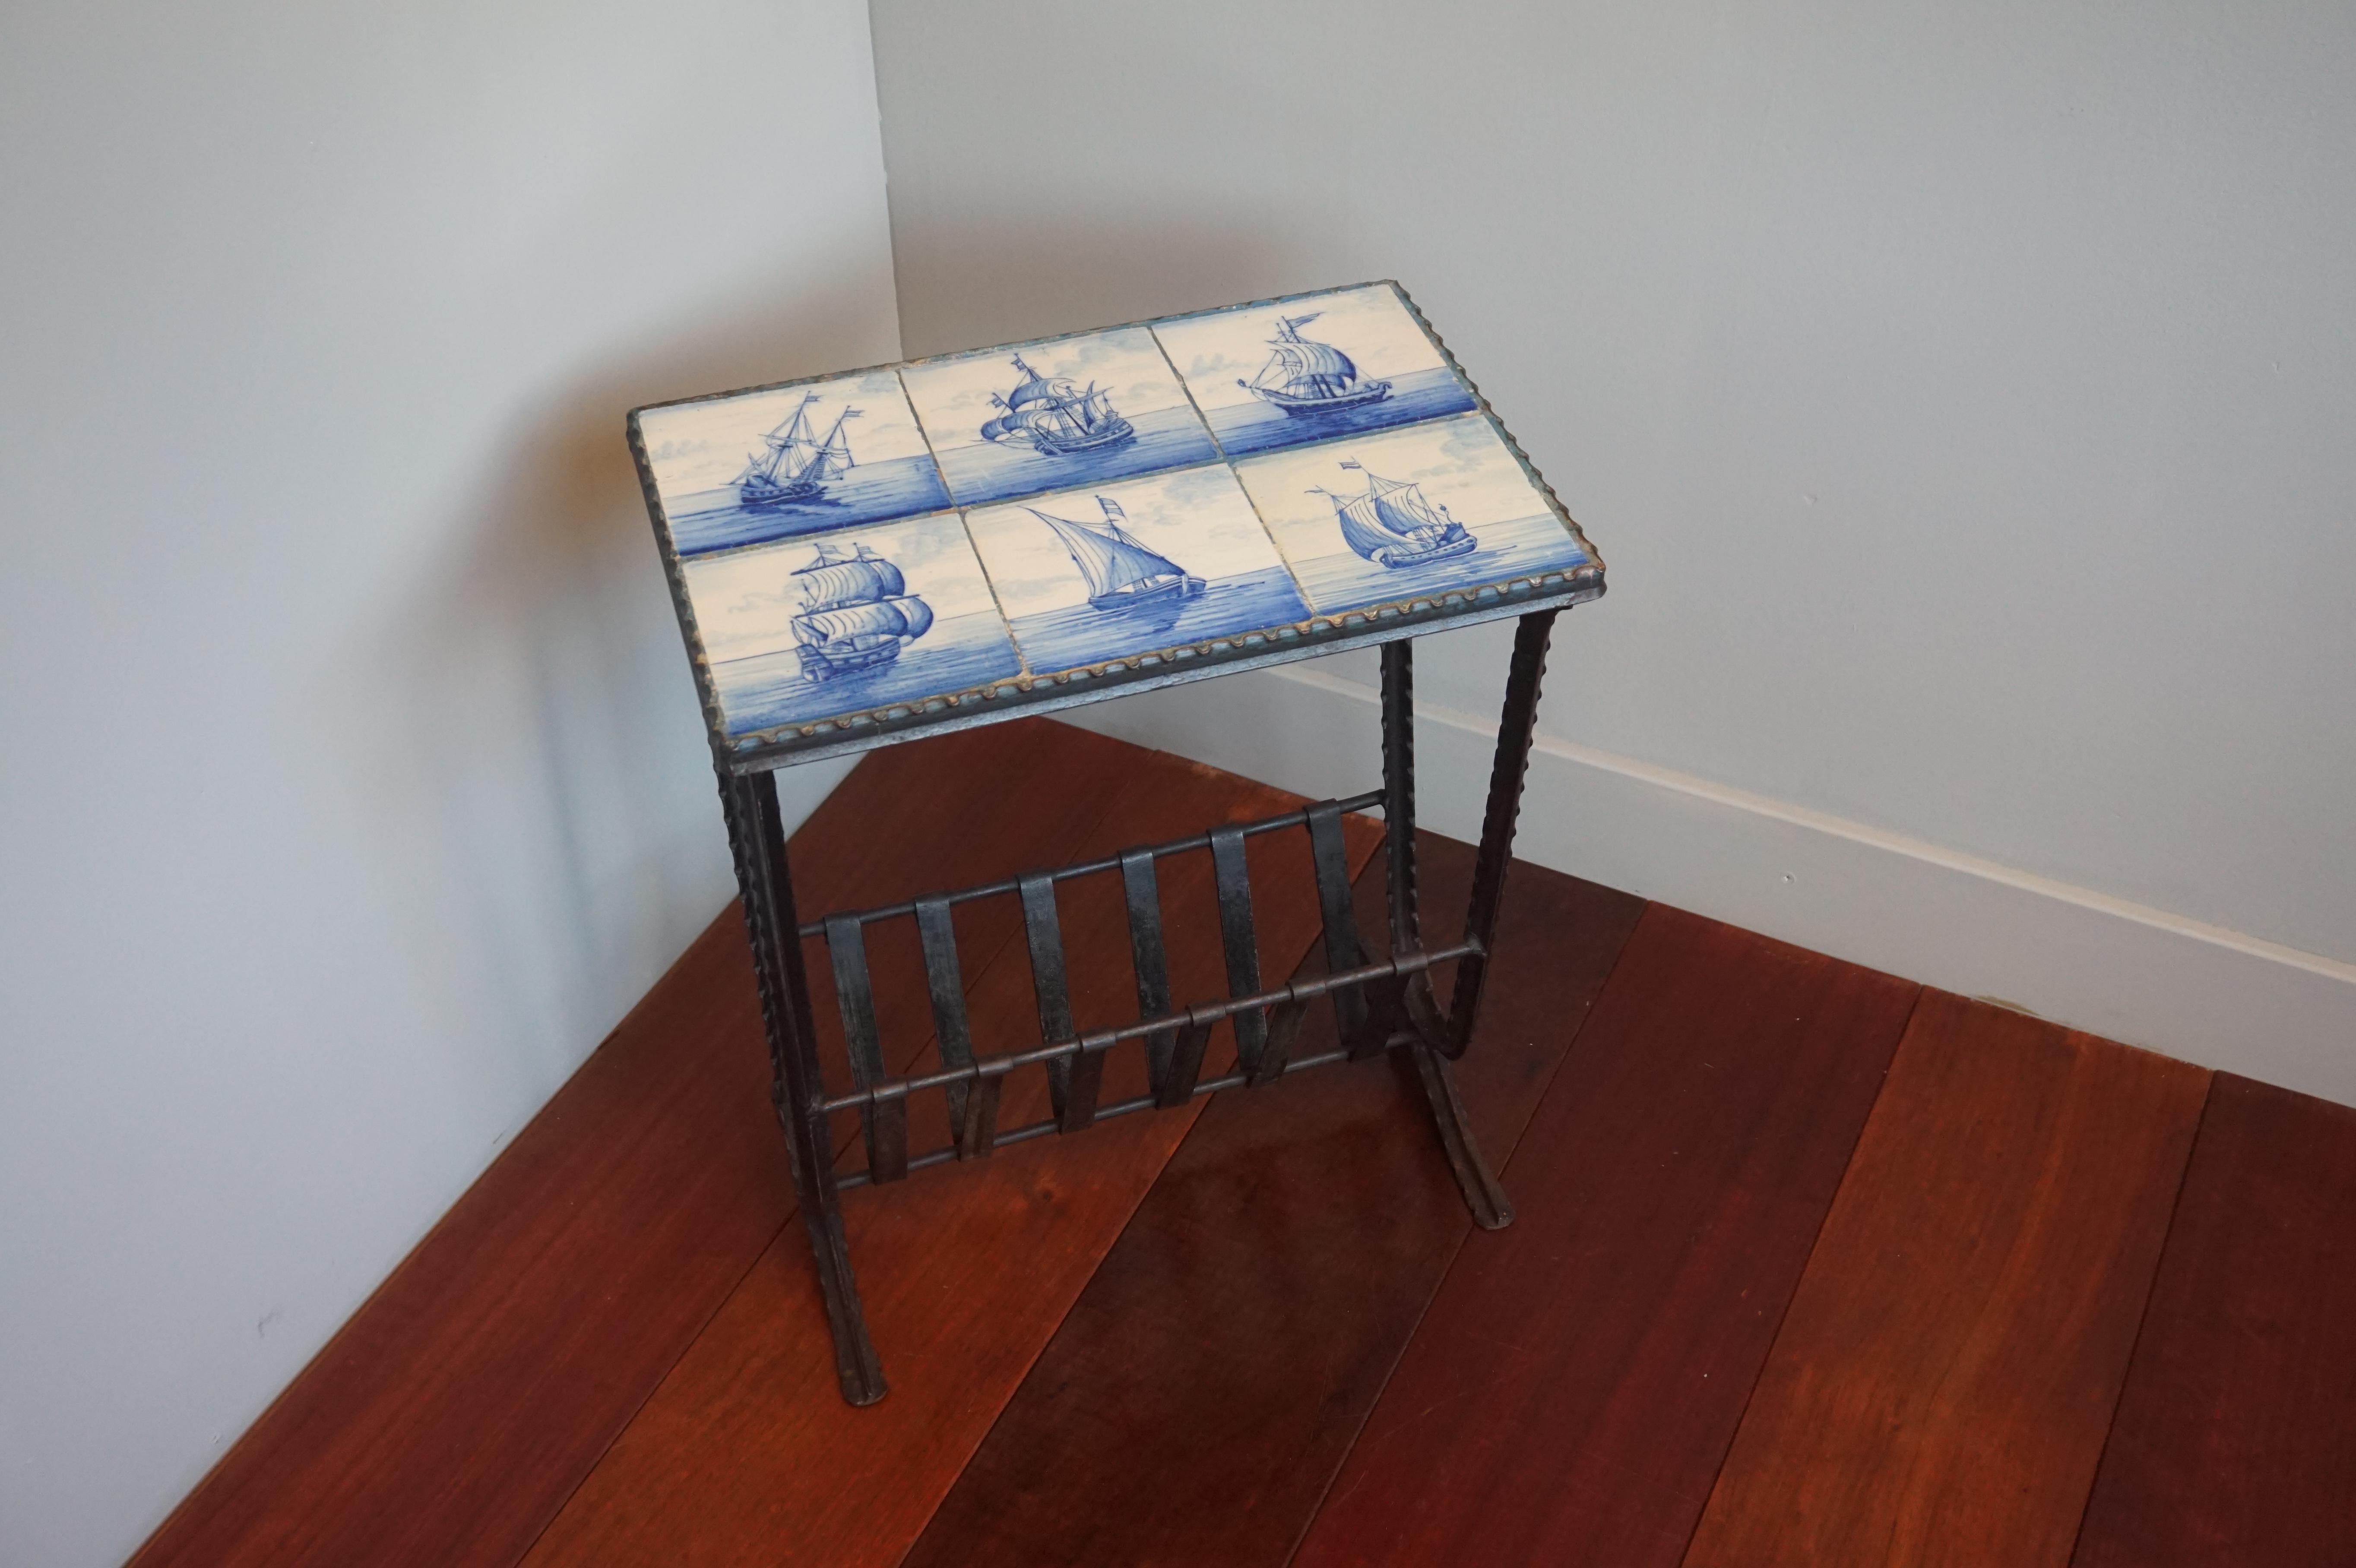 Early 1900s Wrought Iron & Delftware Tiles Table with Hand Painted Ancient Ships 10